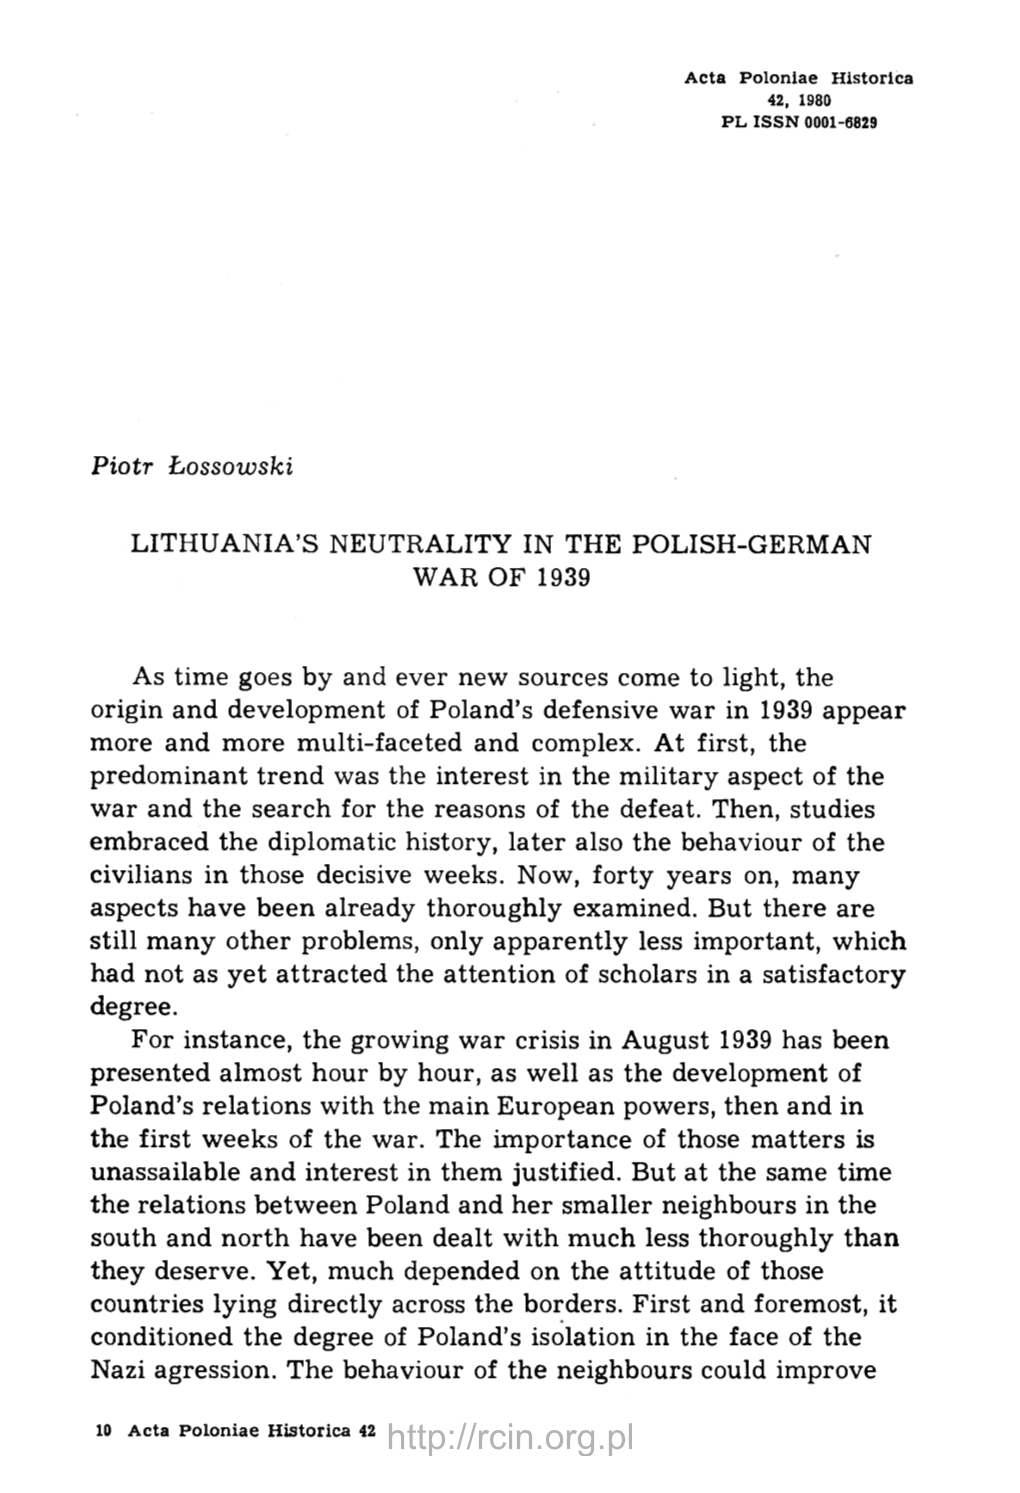 Lithuania's Neutrality in the Polish-German War of 1939